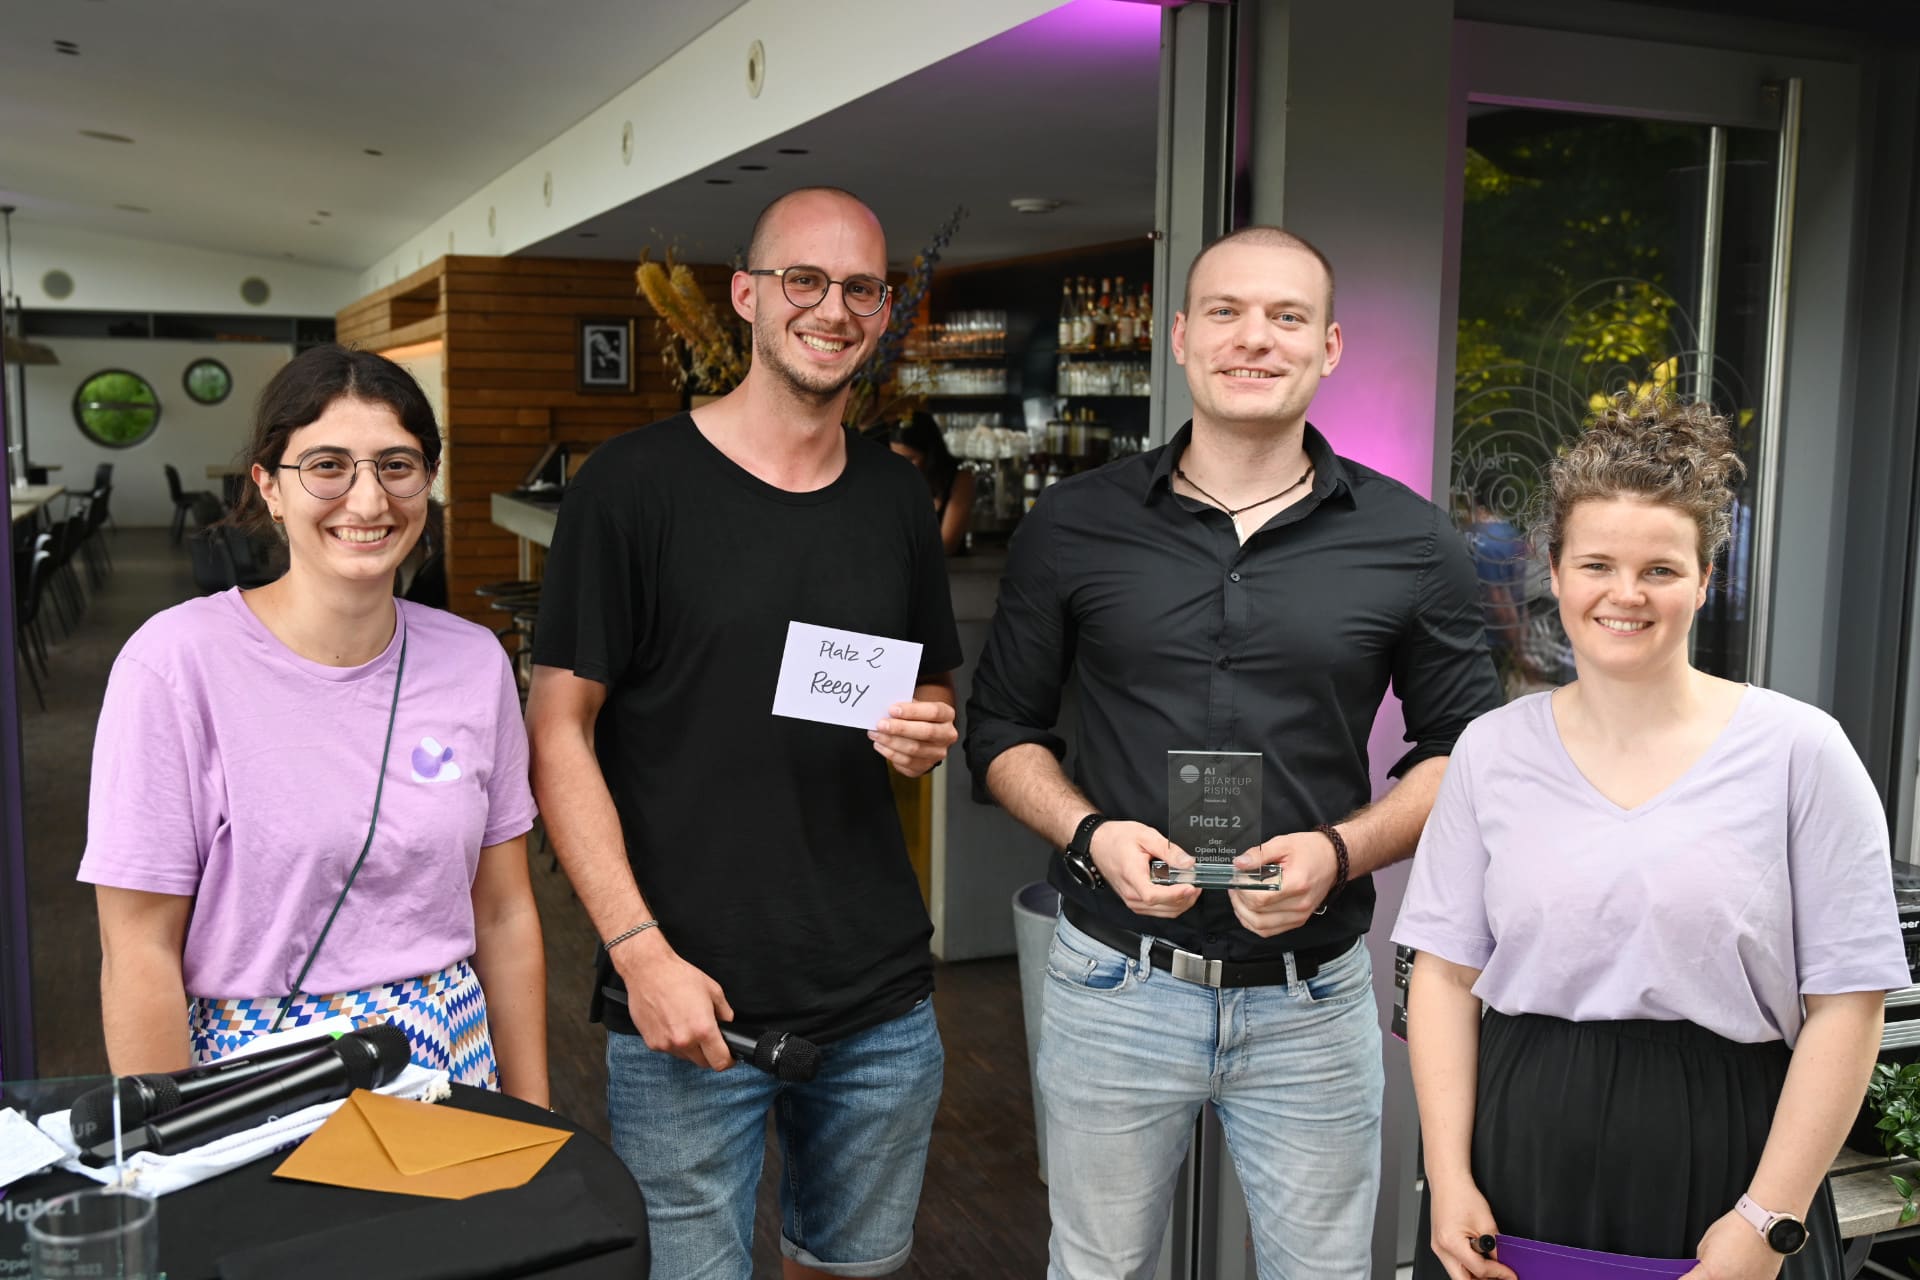 Reegy team at Hessian AI competition award ceremony